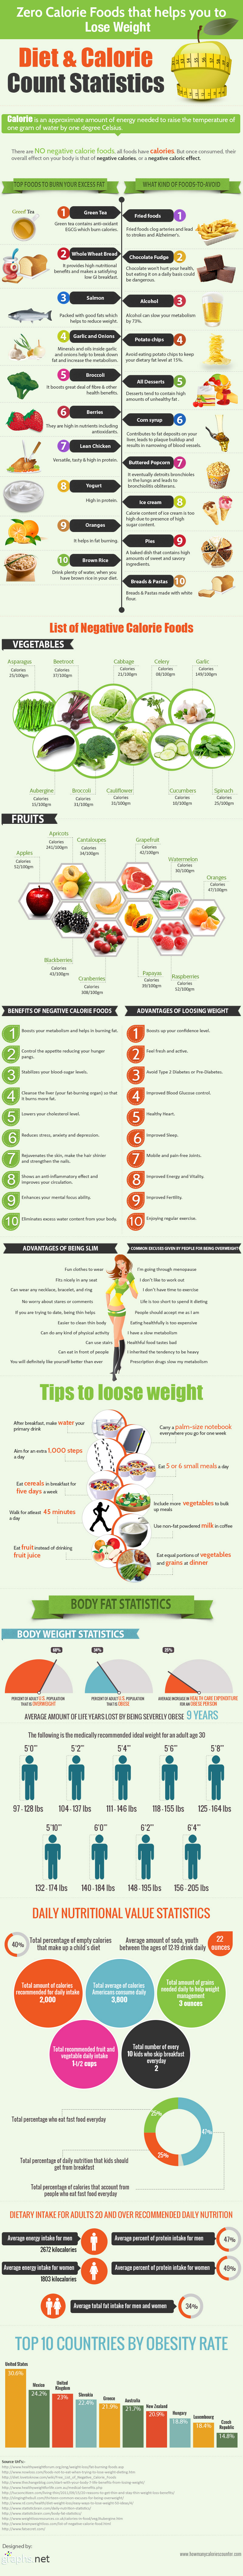 Calorie Counting for Weight Loss